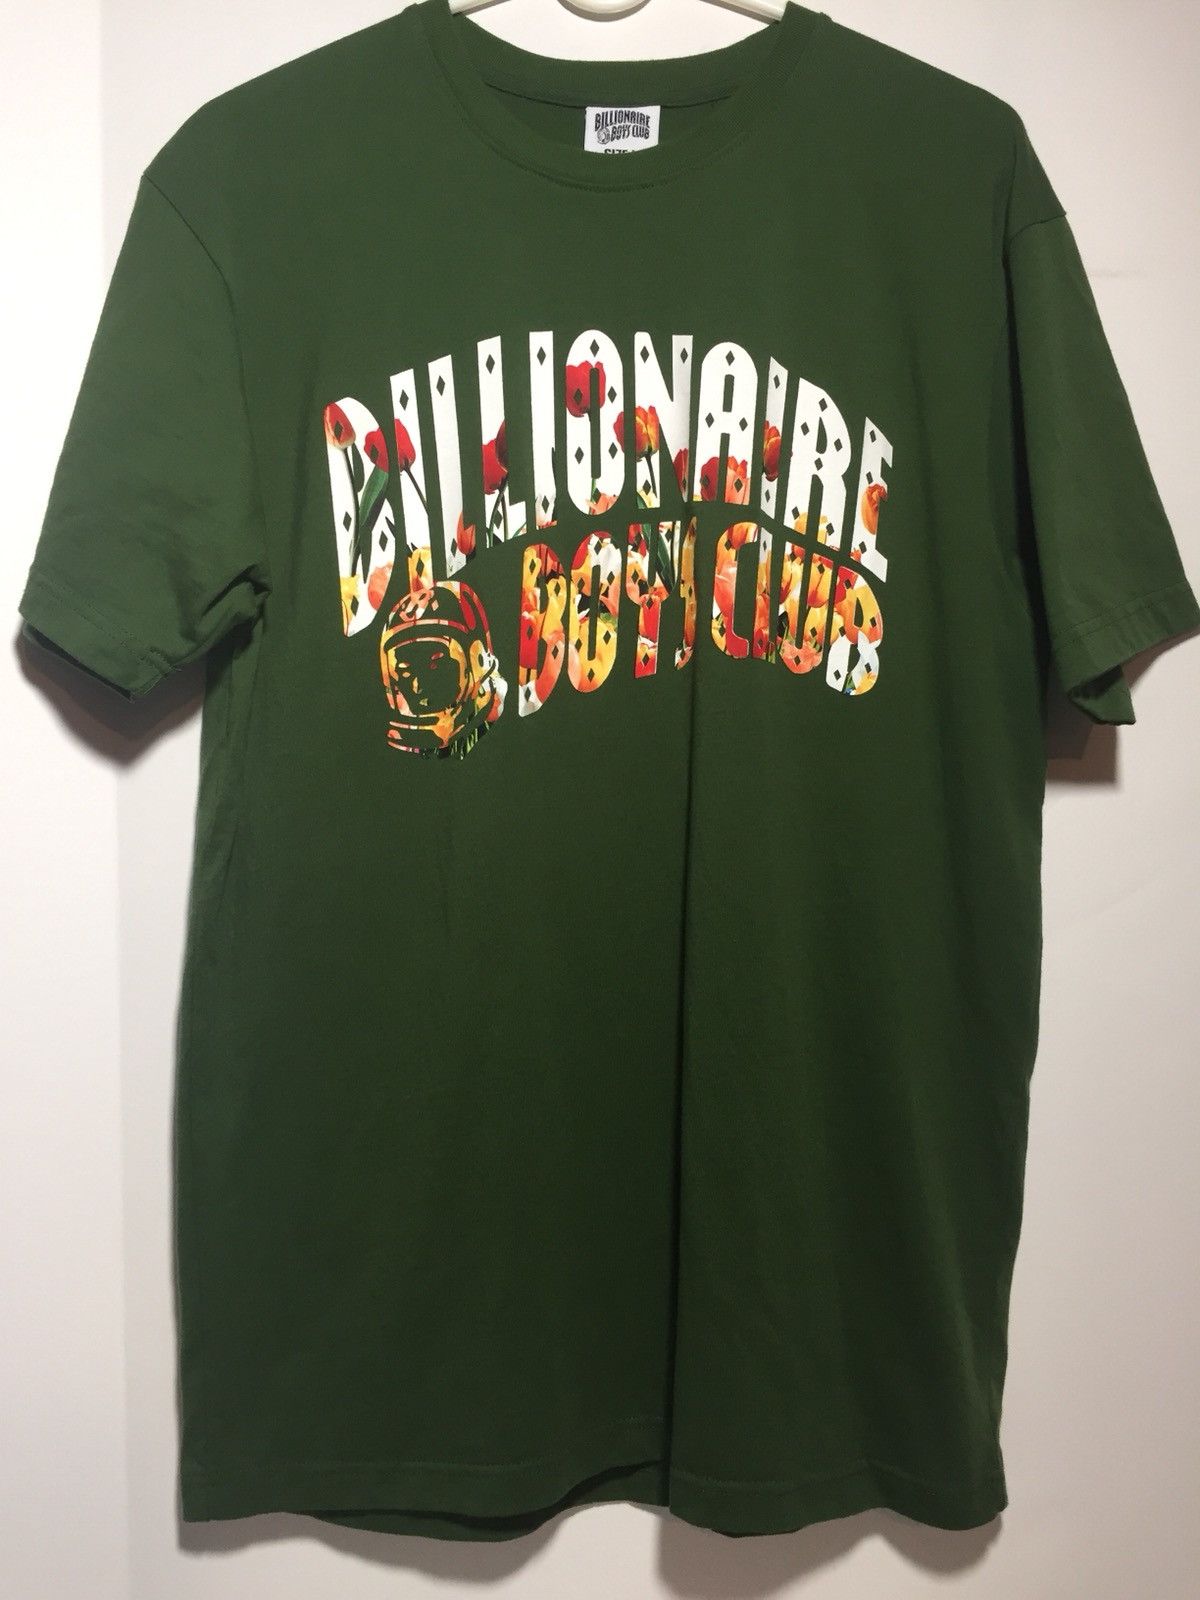 Billionaire Boys Club Billionaire Boys Club Green Floral Tee | Grailed